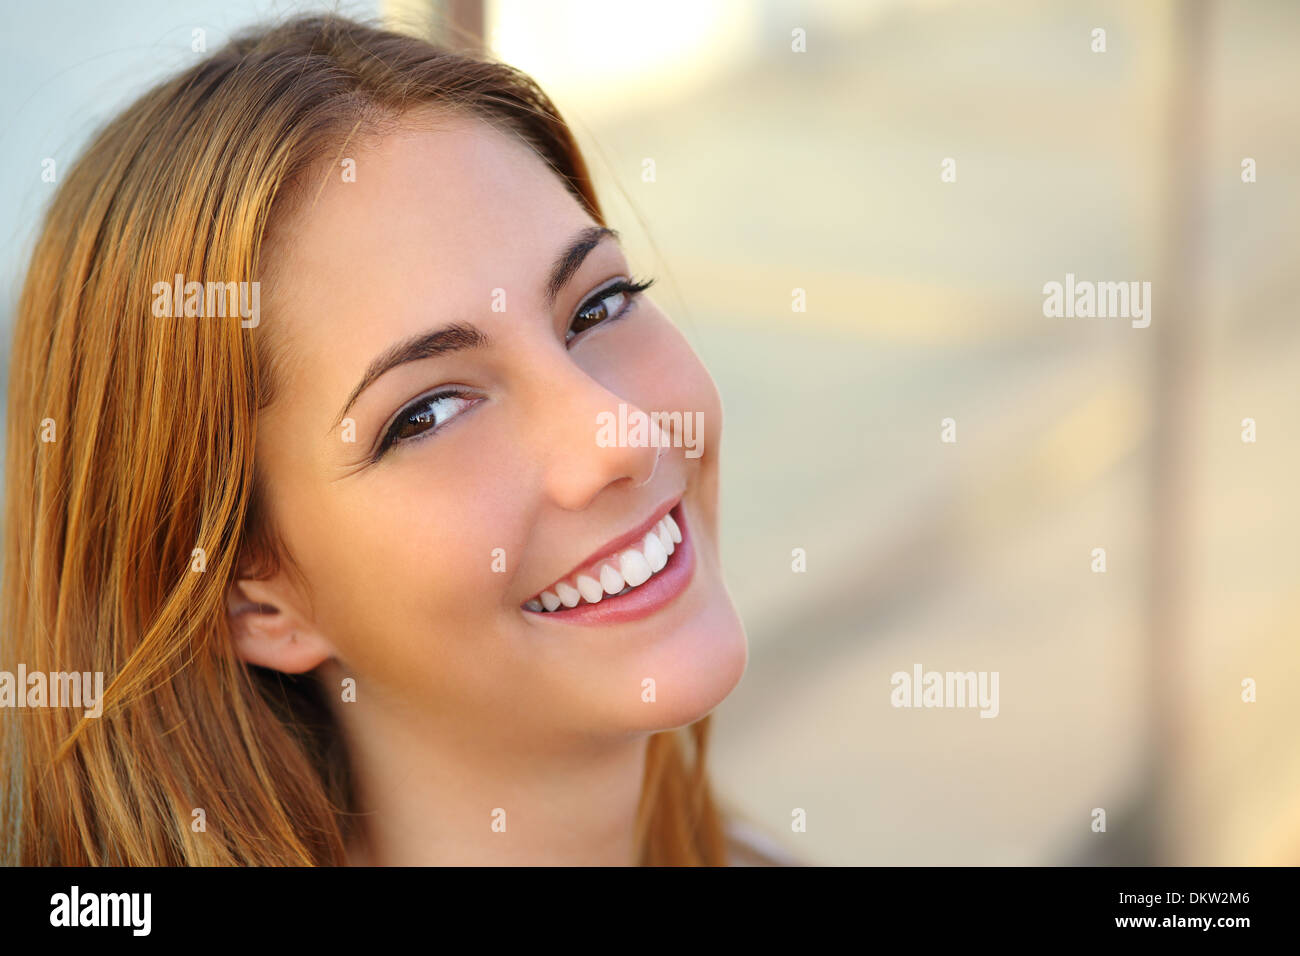 Beautiful woman with a perfect white smile and smooth skin with an unfocused background Stock Photo